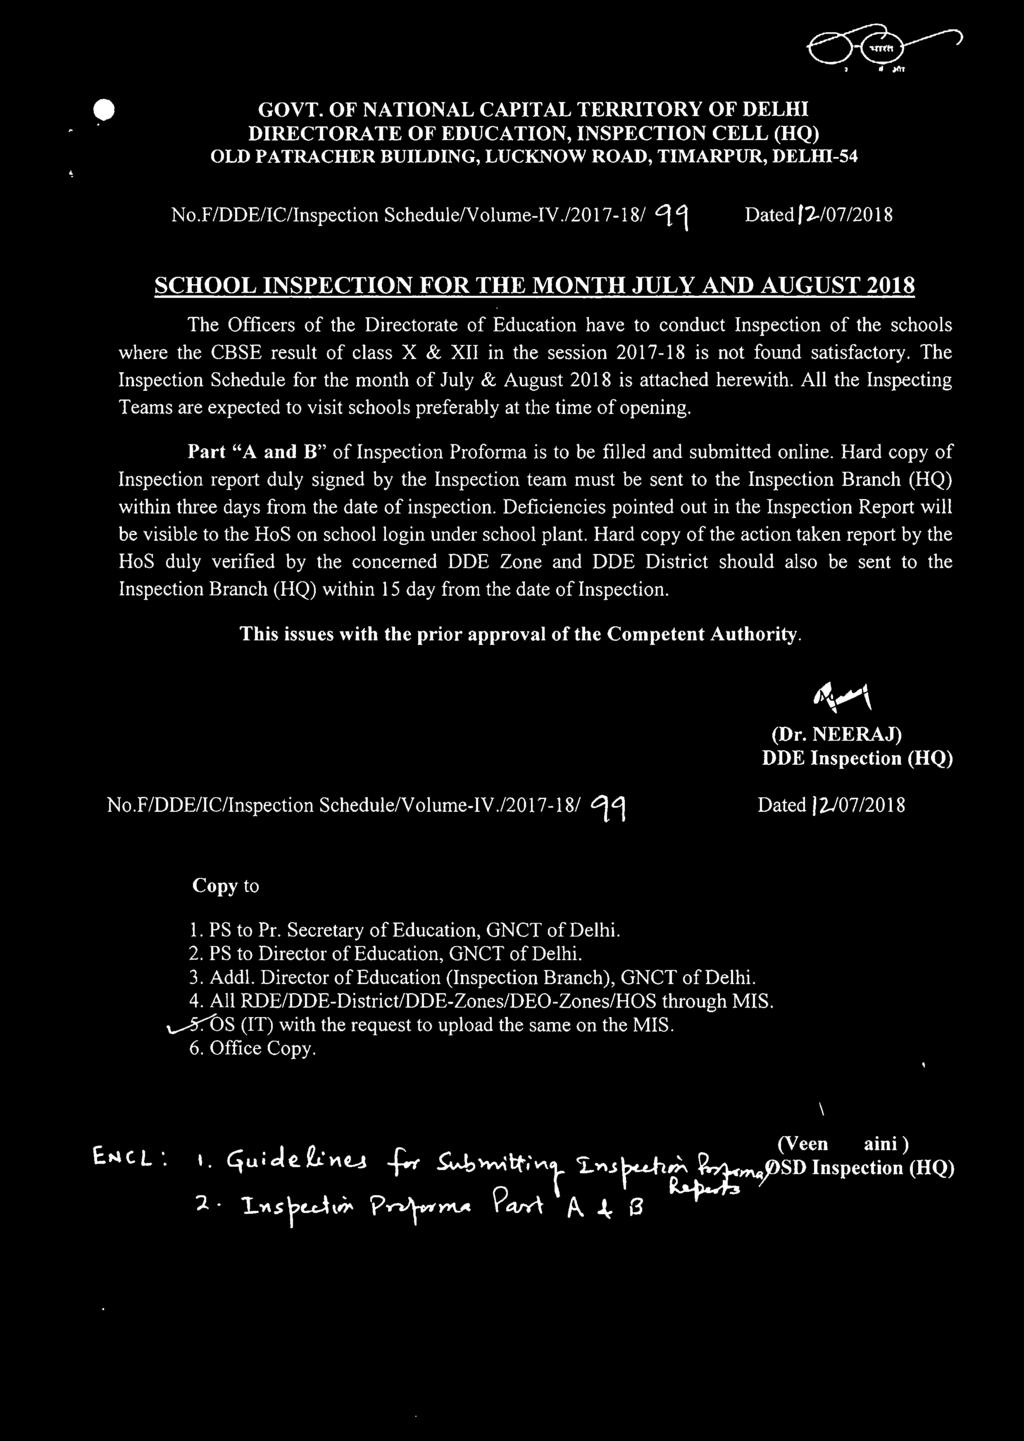 class X & XII in the session 2017-18 is not found satisfactory. The Inspection Schedule for the month of July & August 2018 is attached herewith.